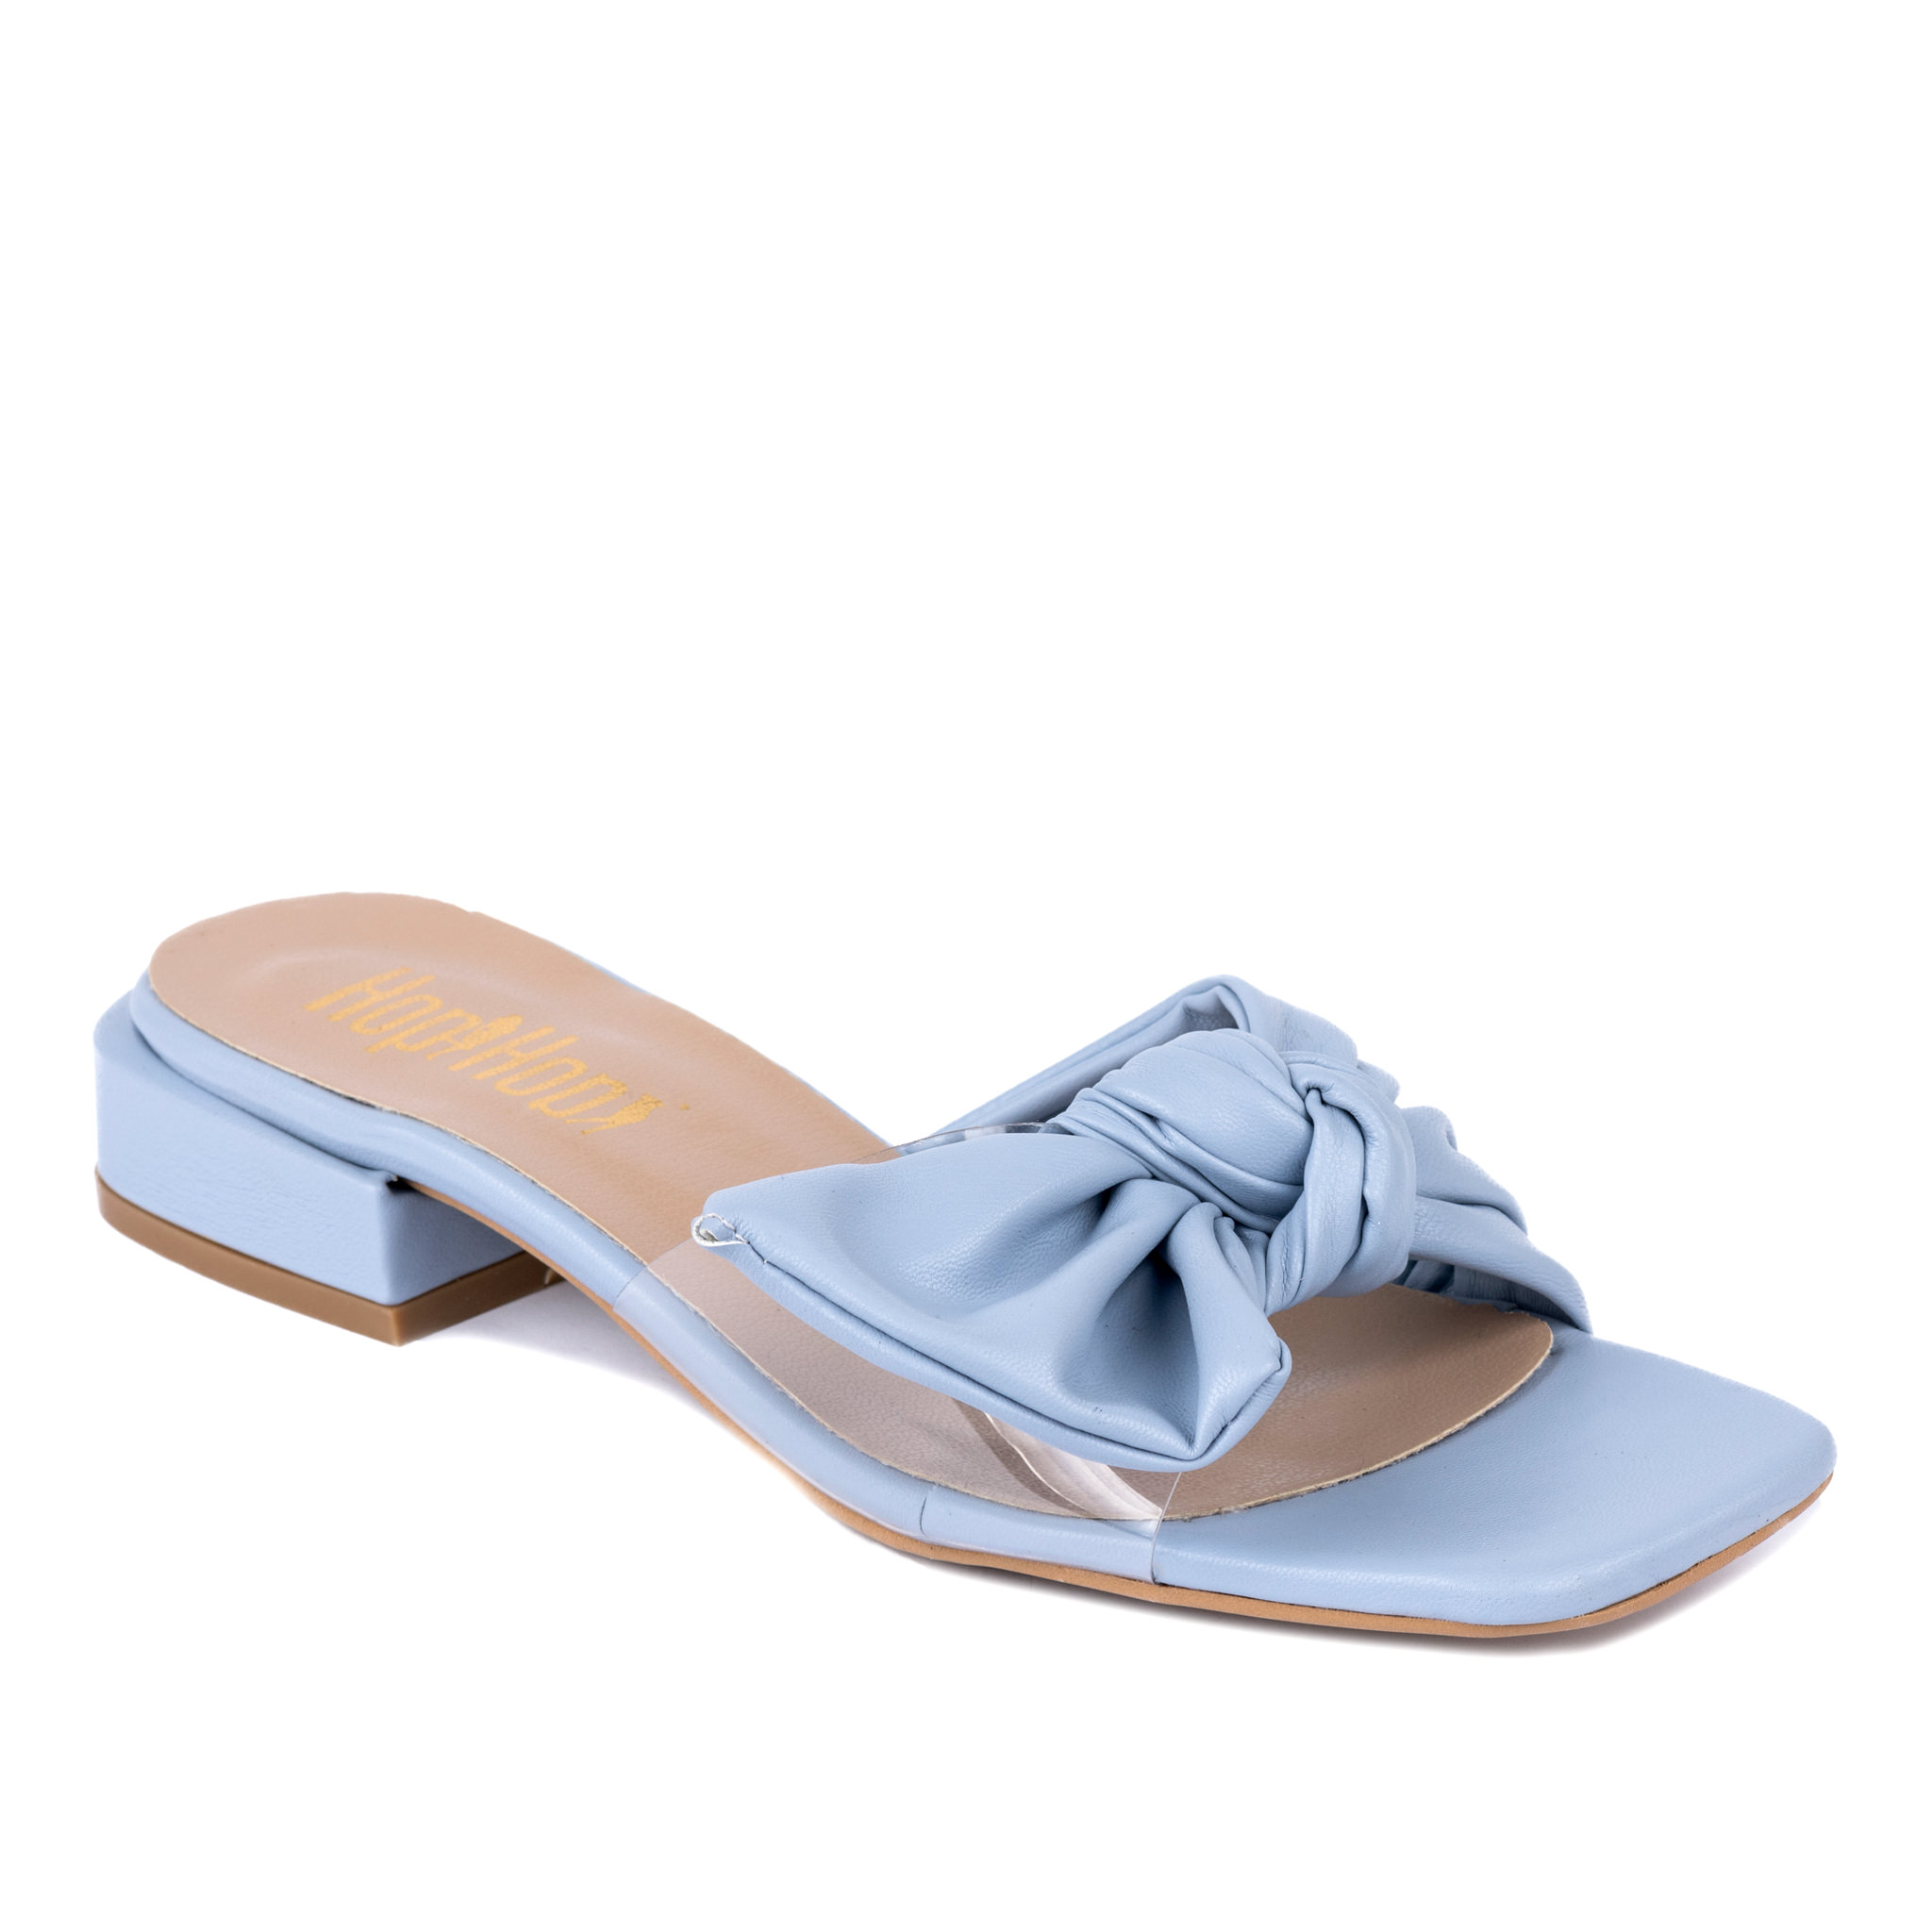 MULES WITH LOW HEEL AND BOW - BLUE